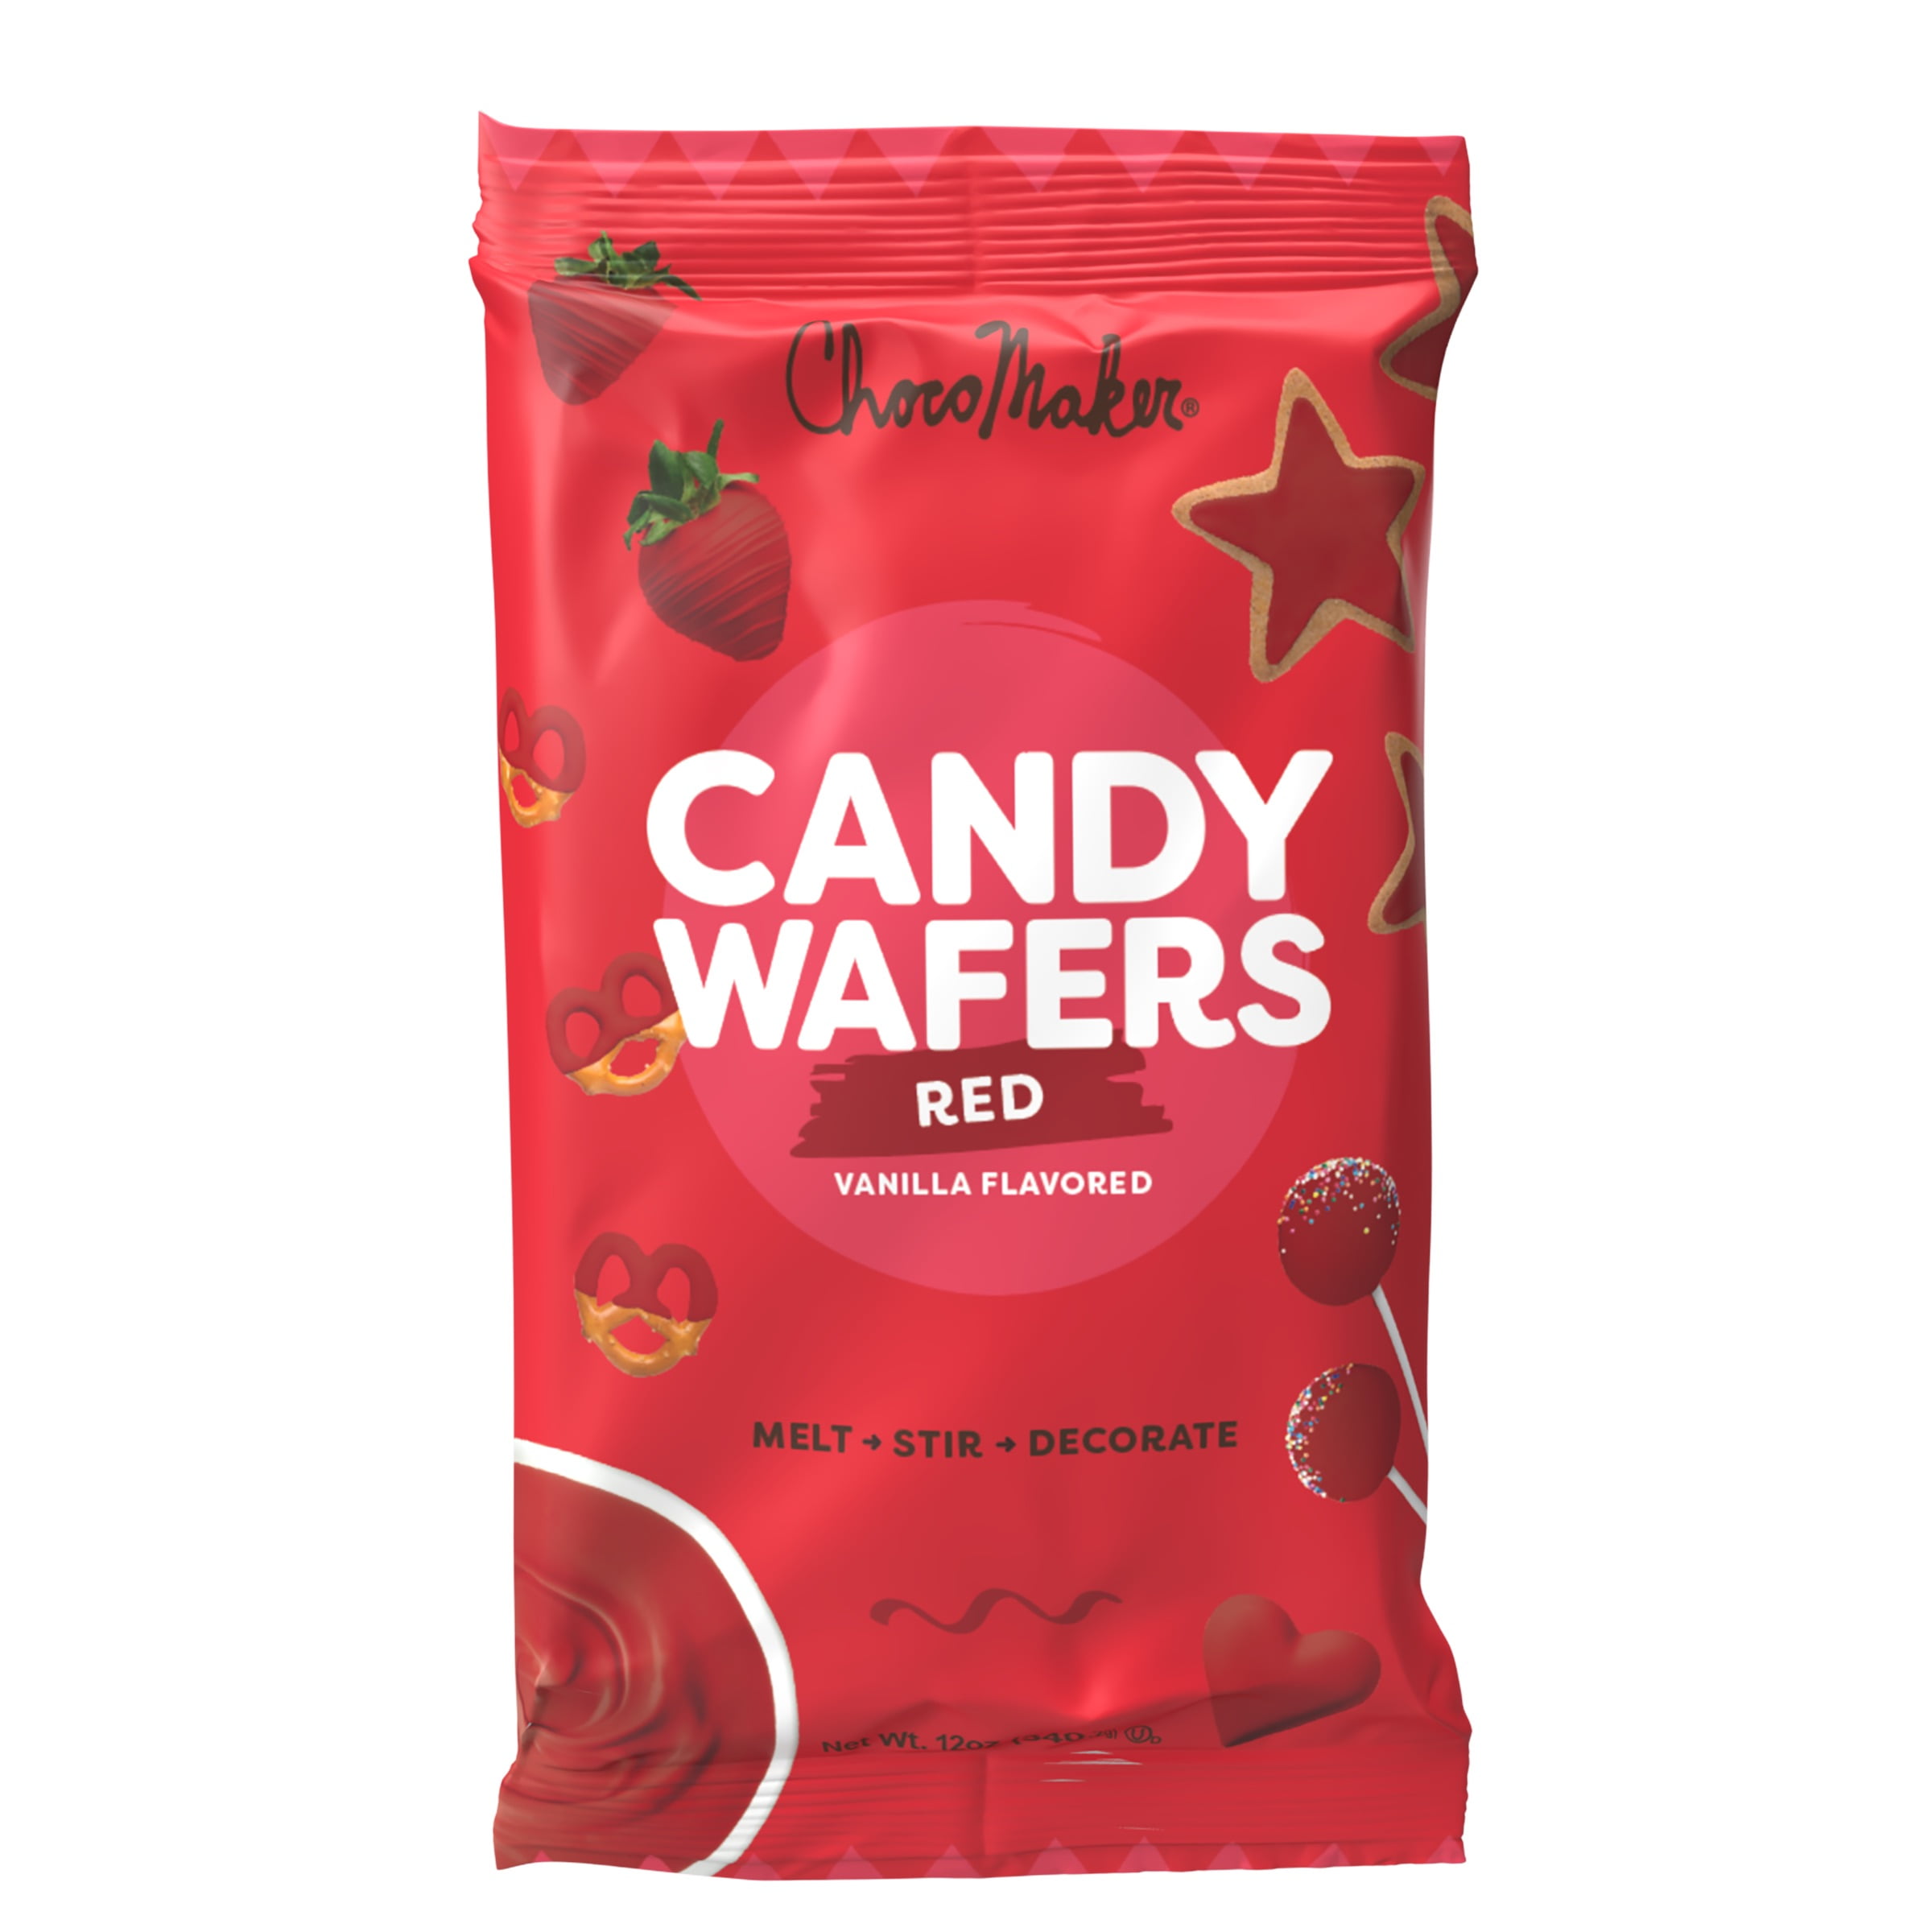 Red Candy Melts 12oz